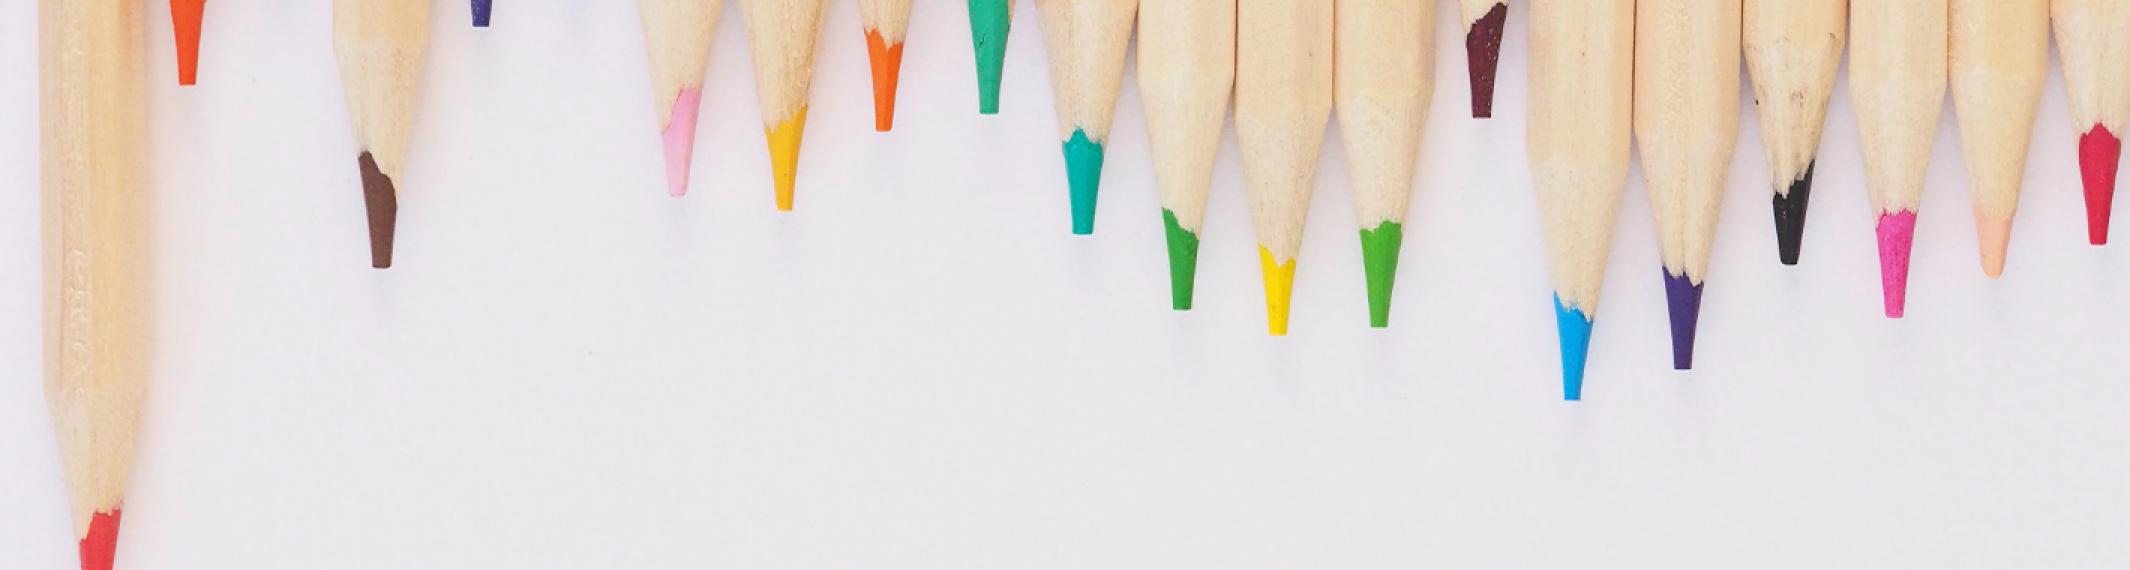 Closeup of sharpened pencil tips in various colors